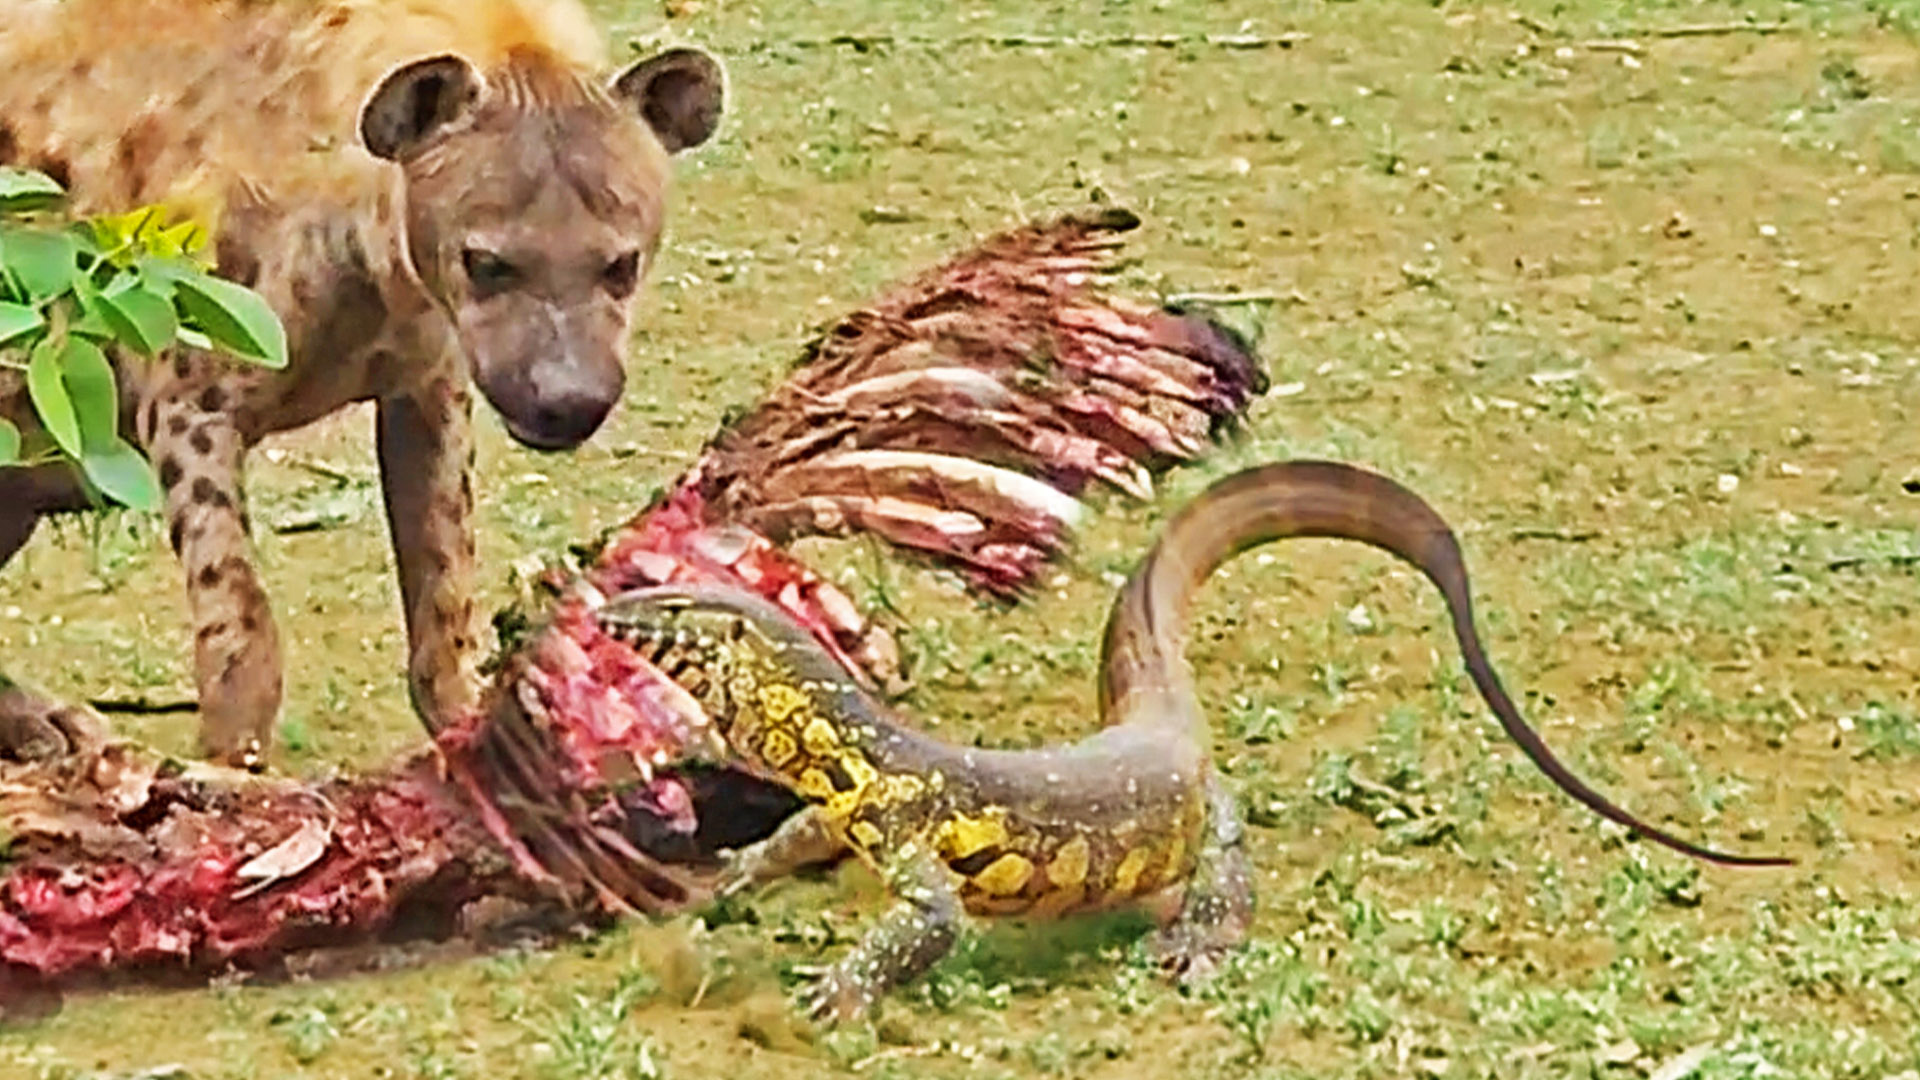 Lizard Protects Zebra by Slapping Hyena in the Face with Its Tail